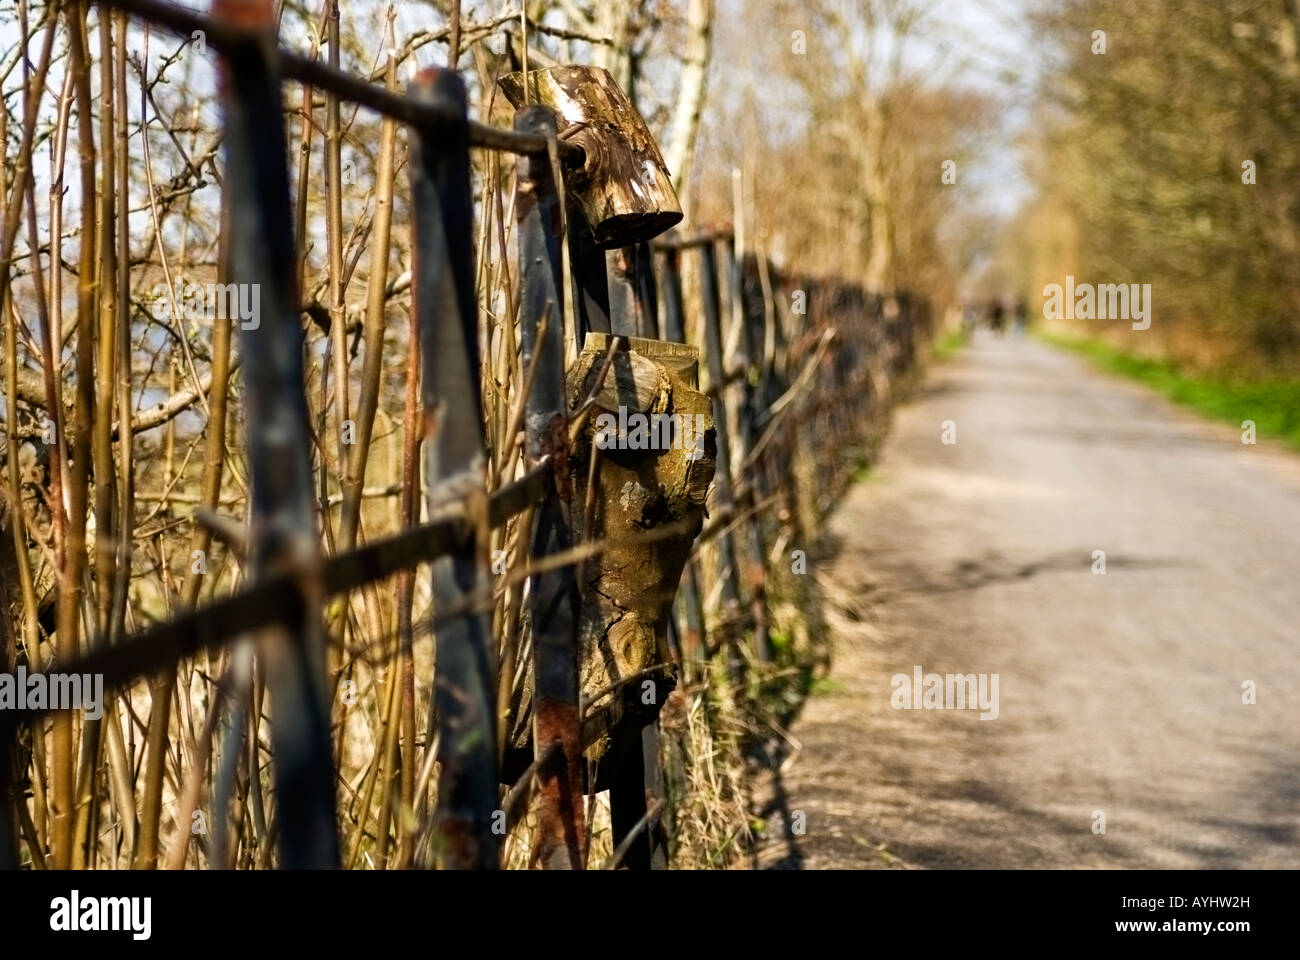 View of a tree that has grown around a metal fence Stock Photo